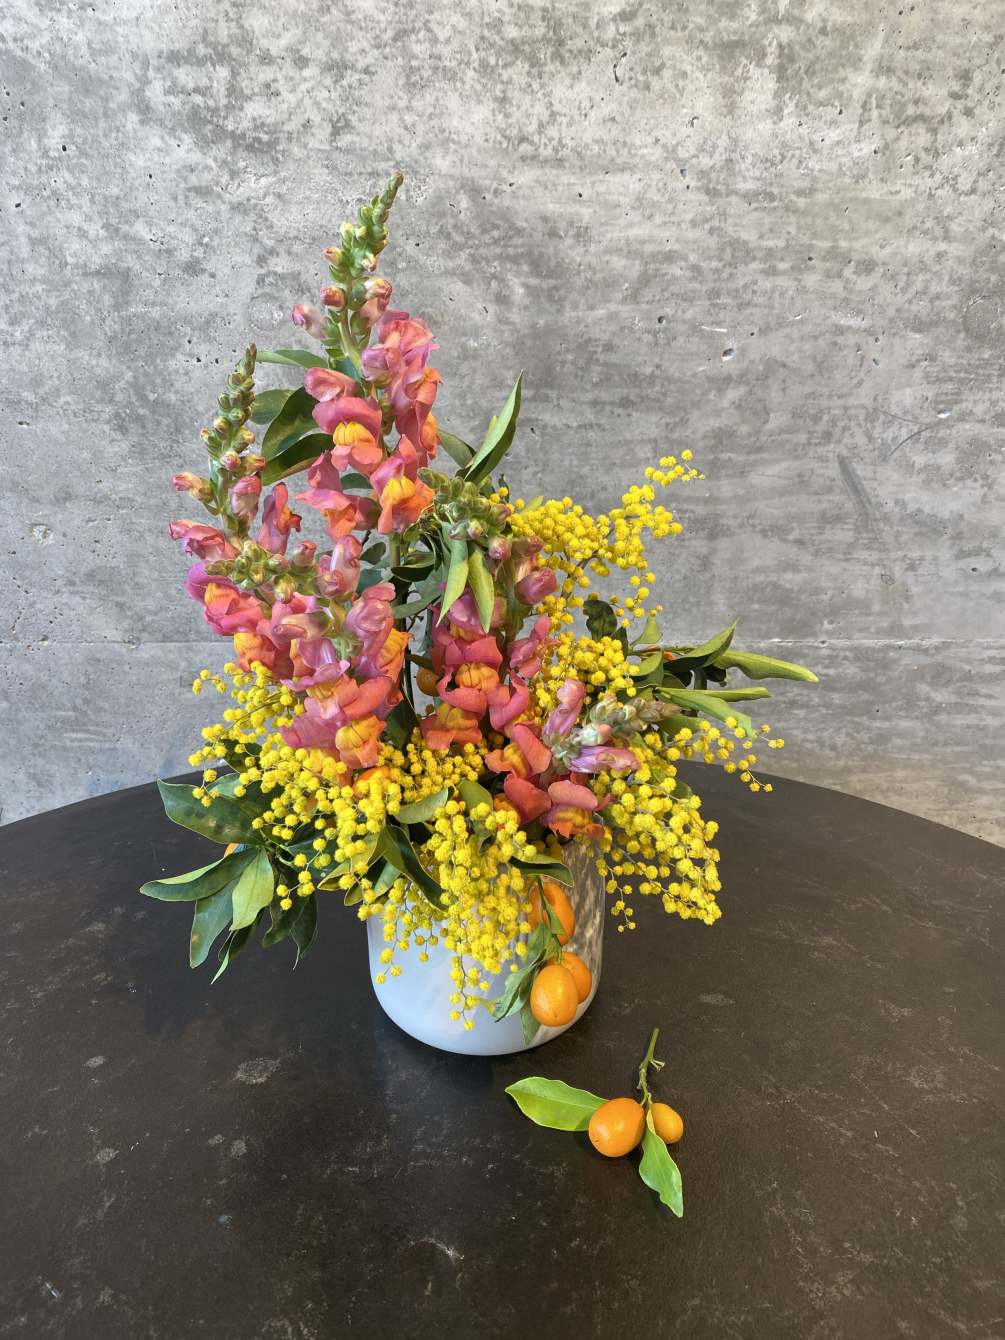 A petit mix of snap dragons, citrus, and bright yellow accents (blooming